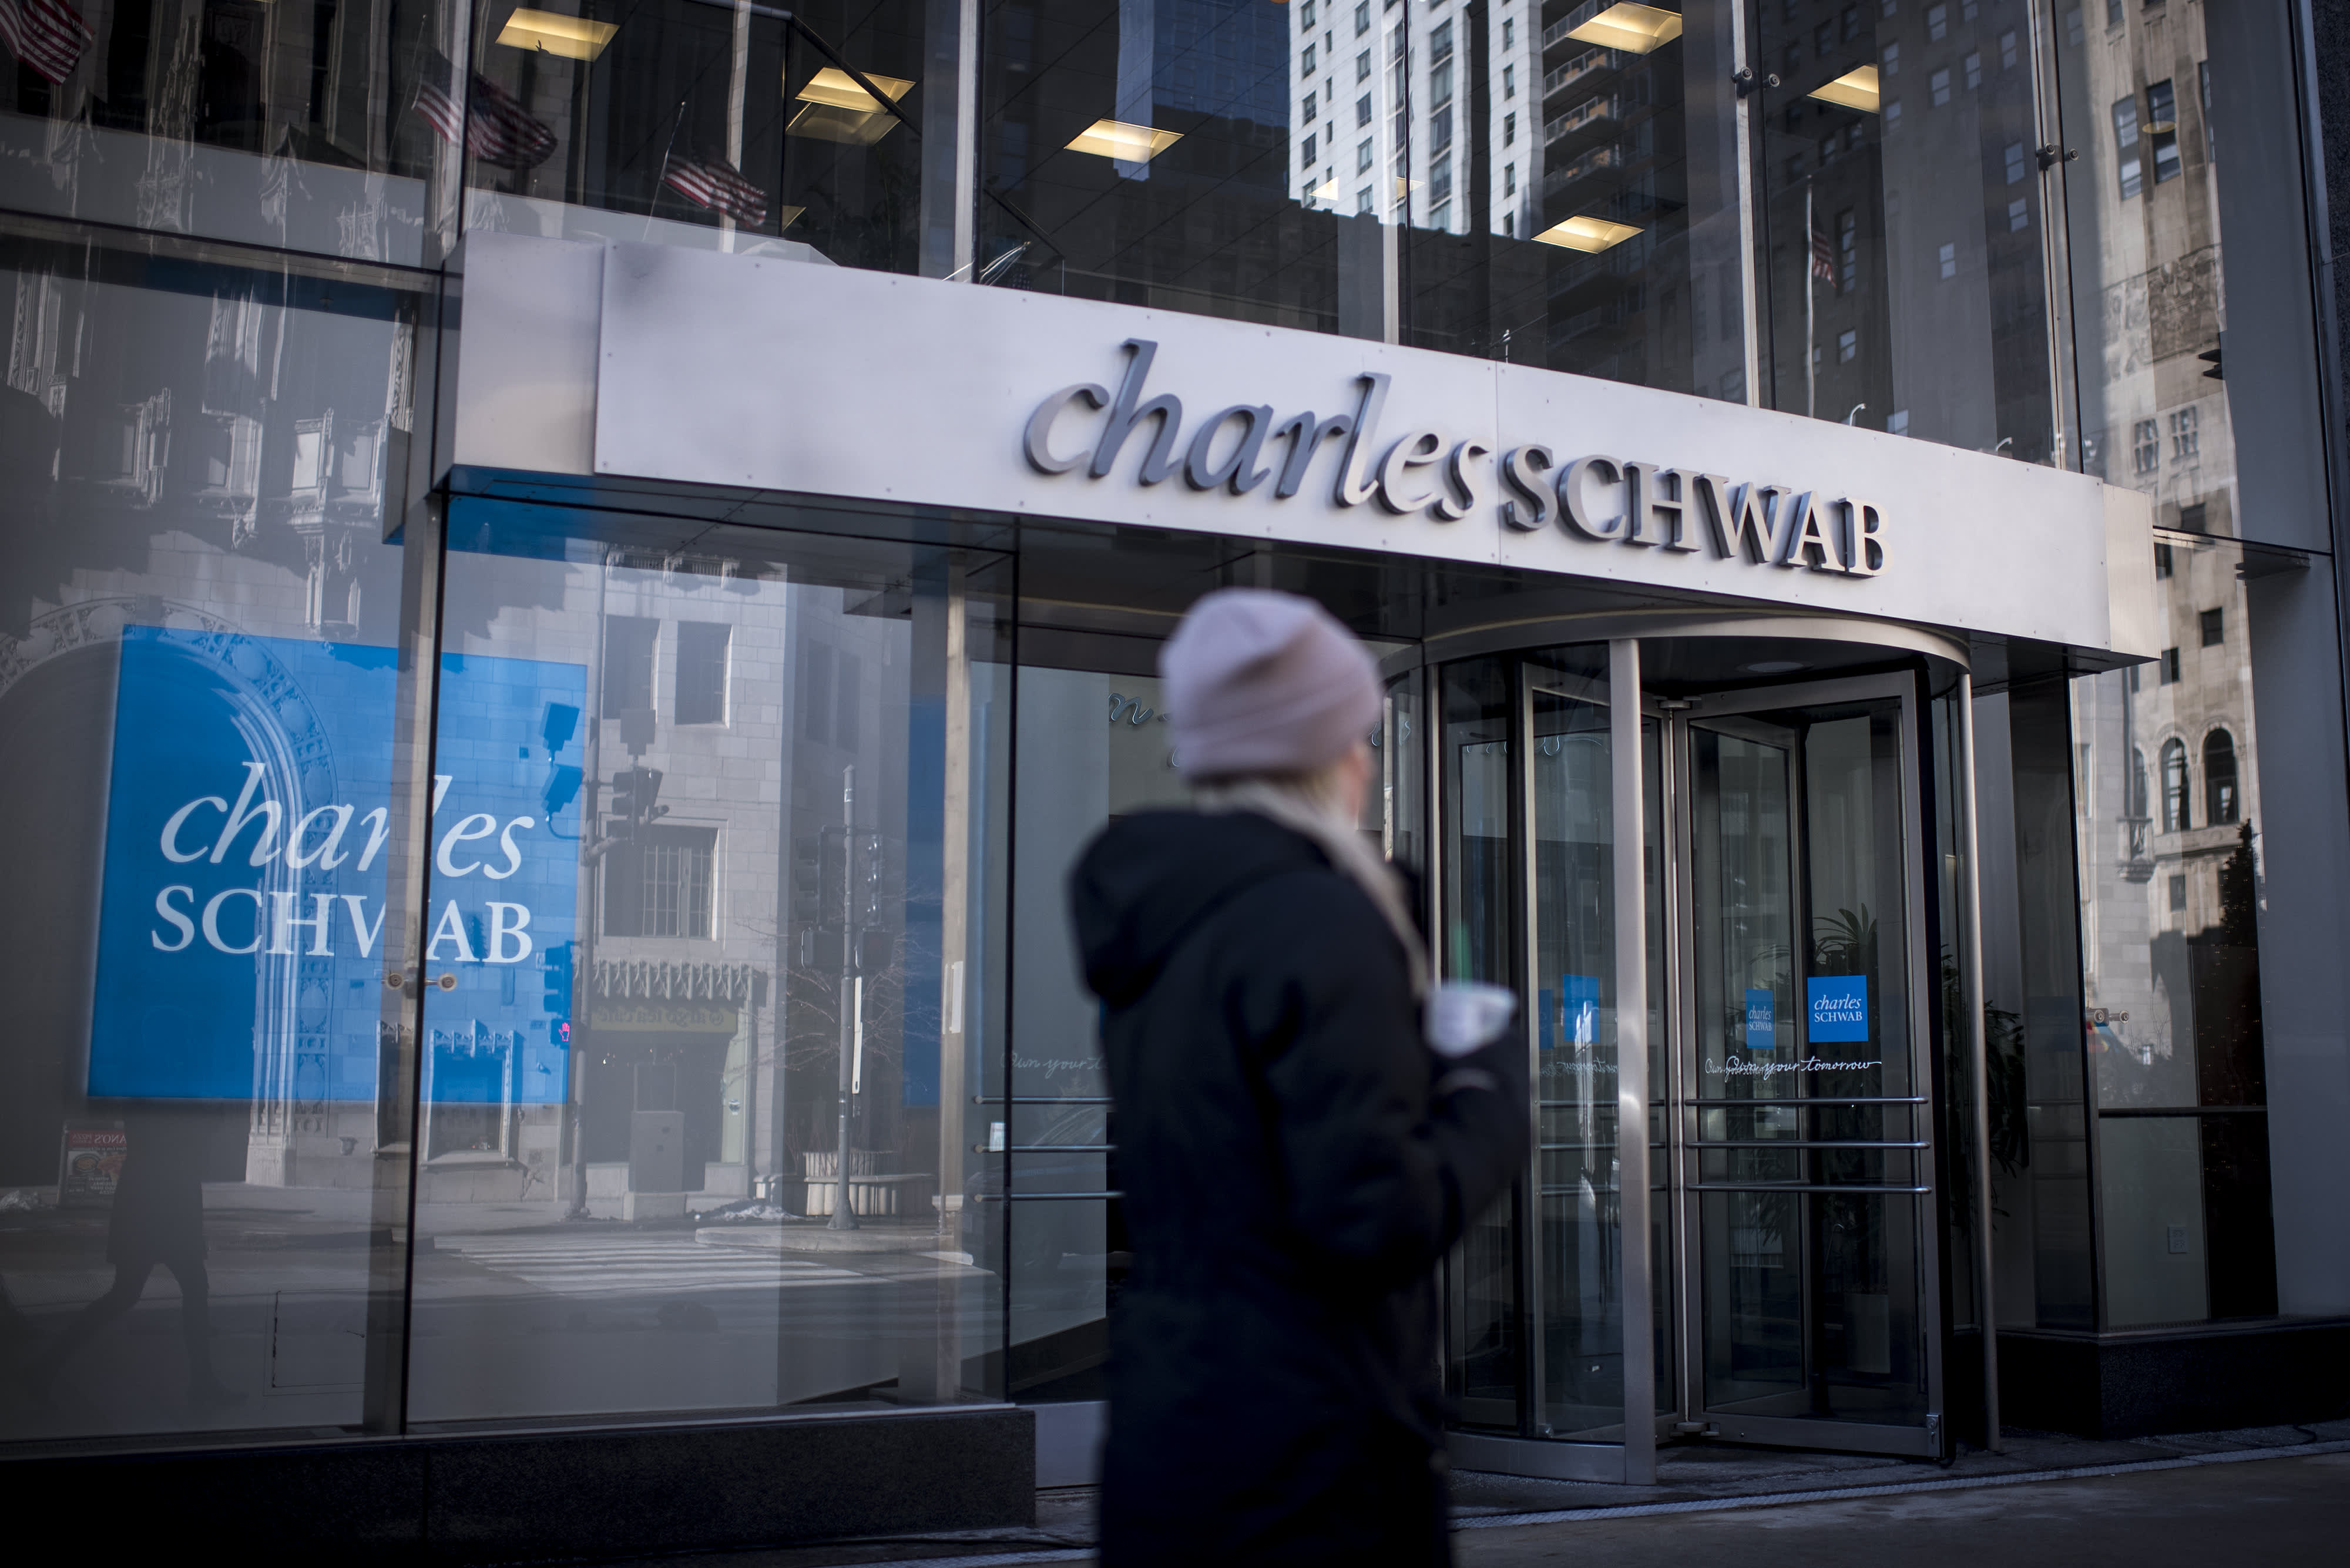 Morgan Stanley downgrades Charles Schwab, cites extended earnings recovery timeline